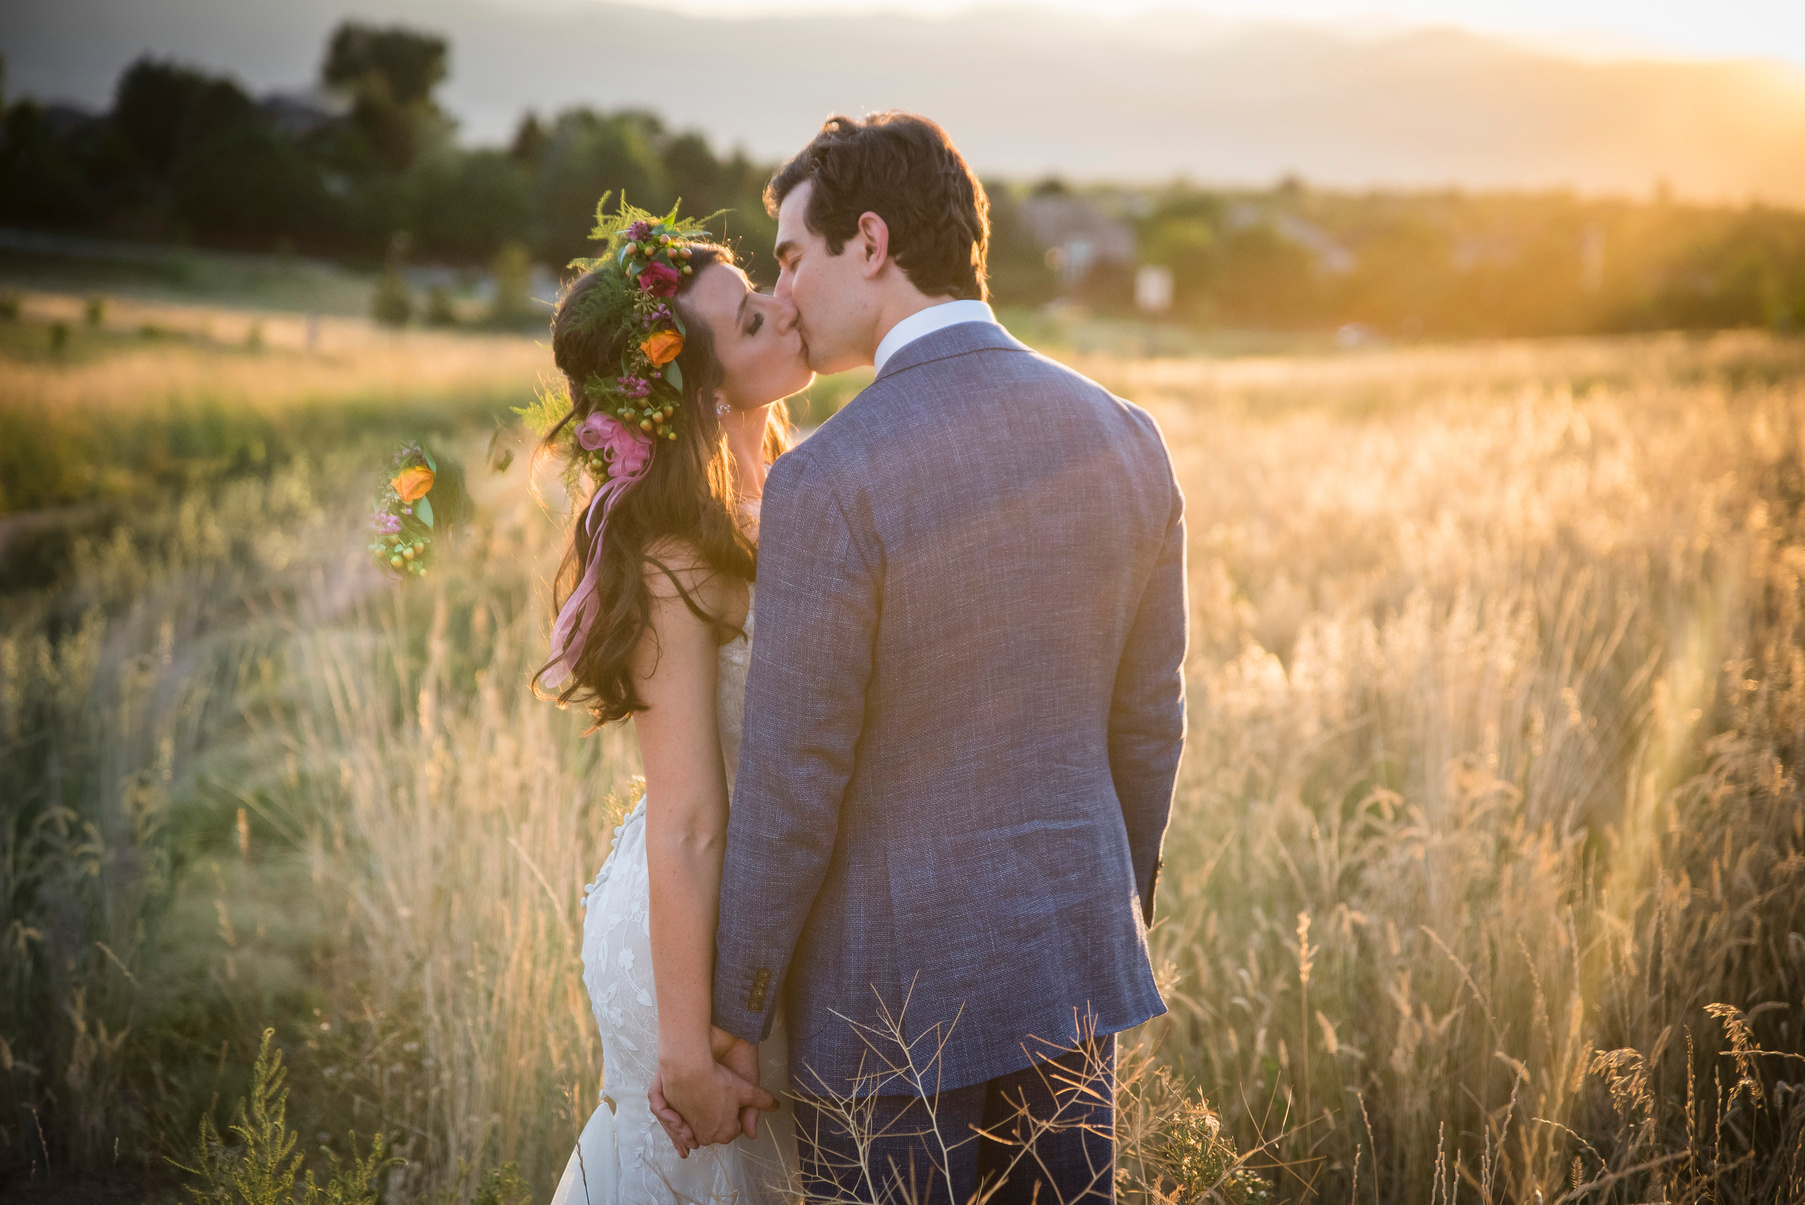 The bride and groom share a kiss in the middle of a field at sunset.